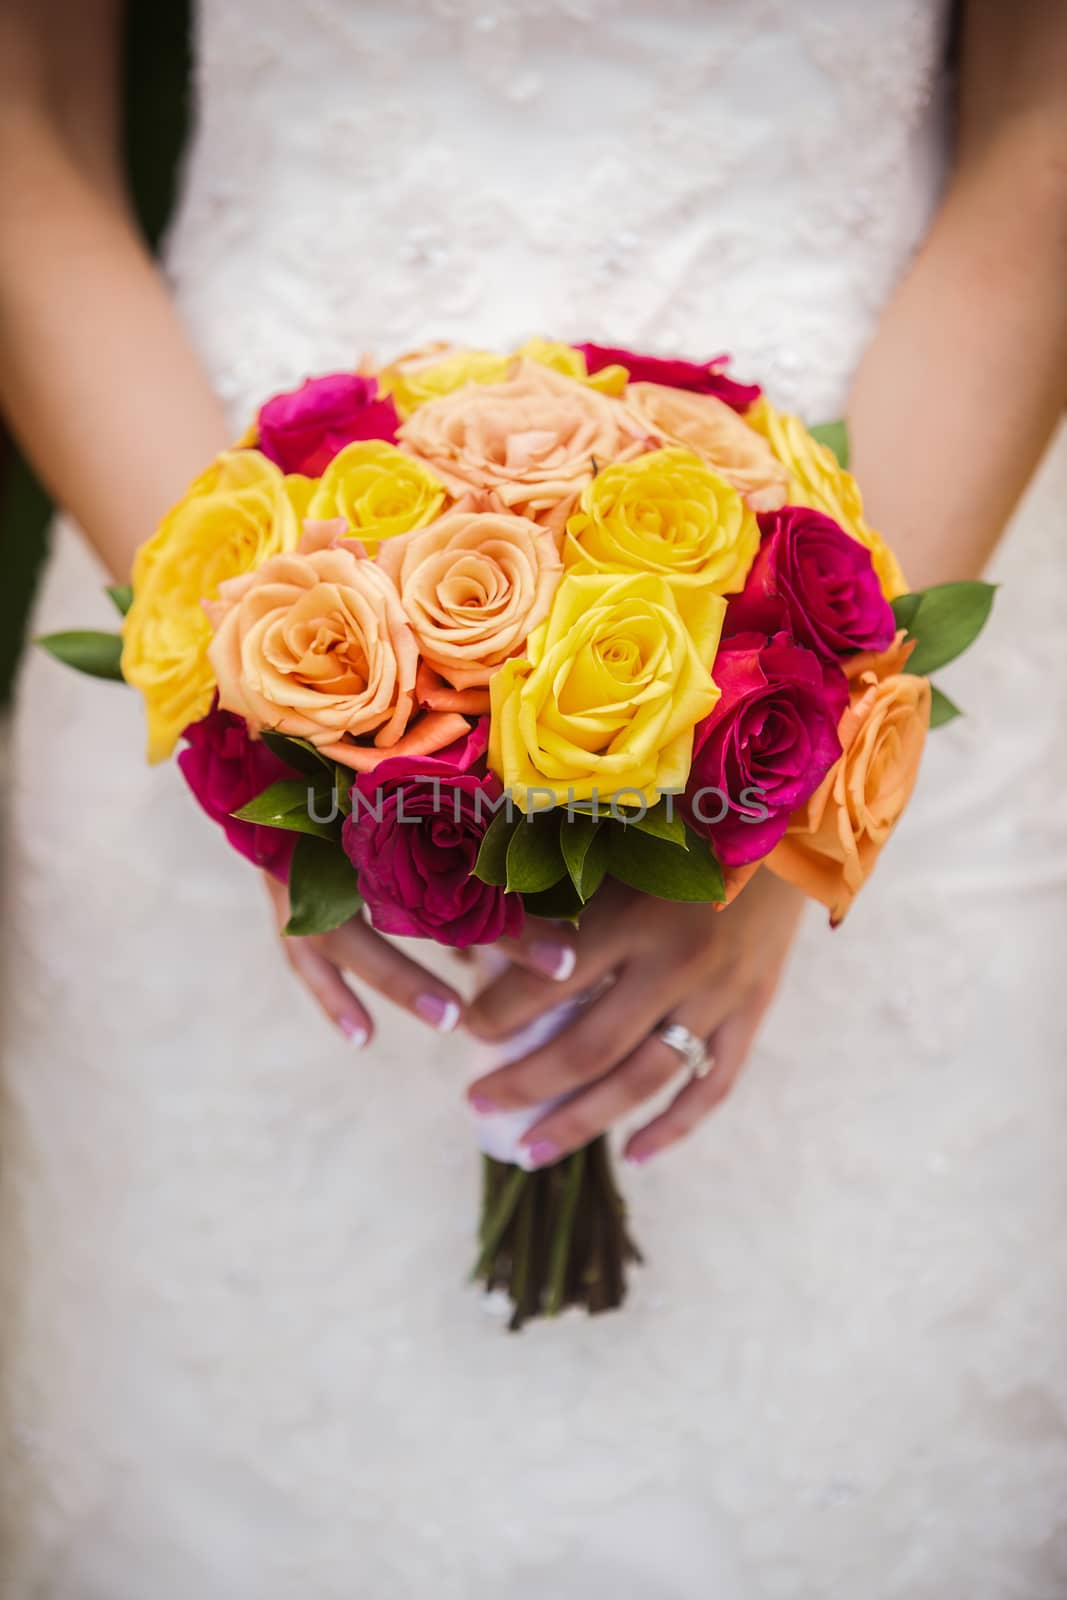 Bride Holding Colored Bouquet by salejandro